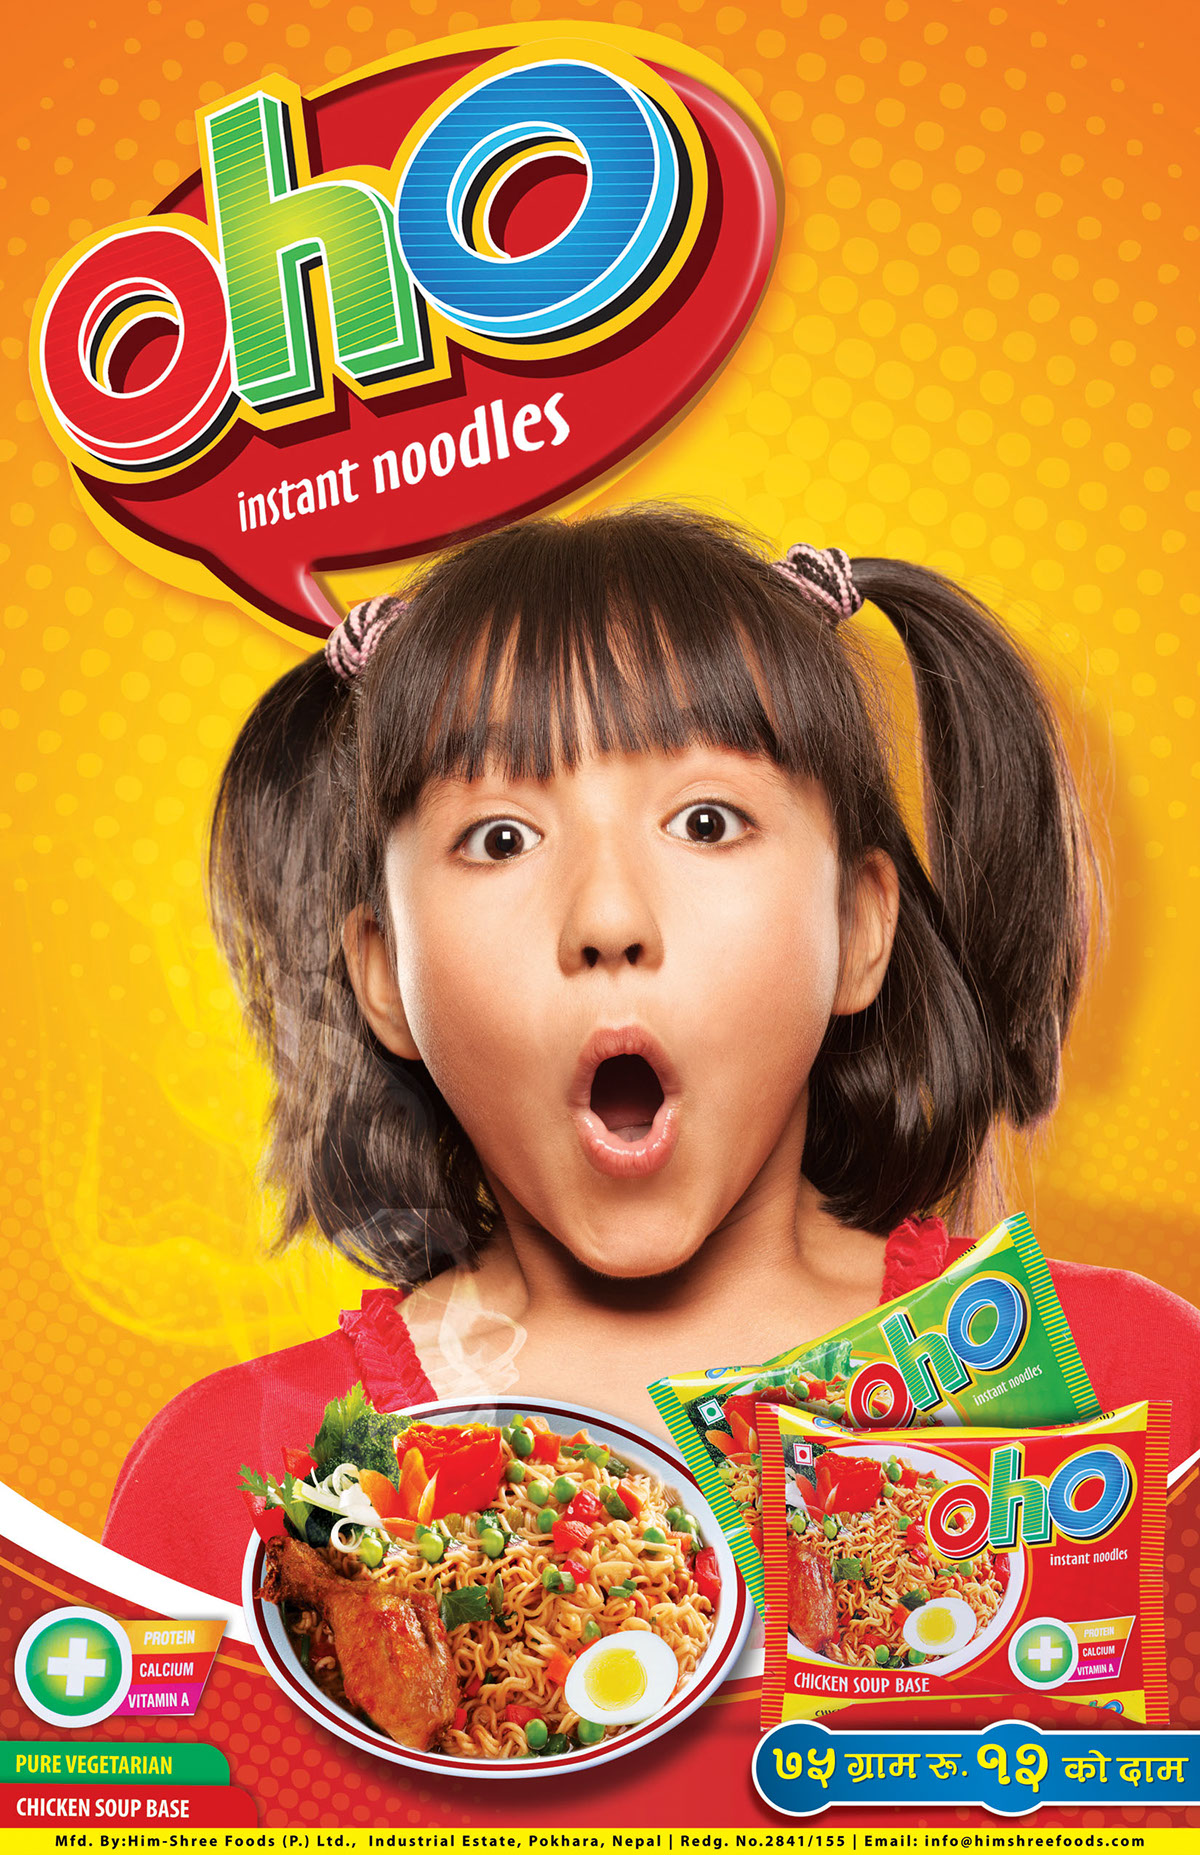 print instant noodles oho brand poster